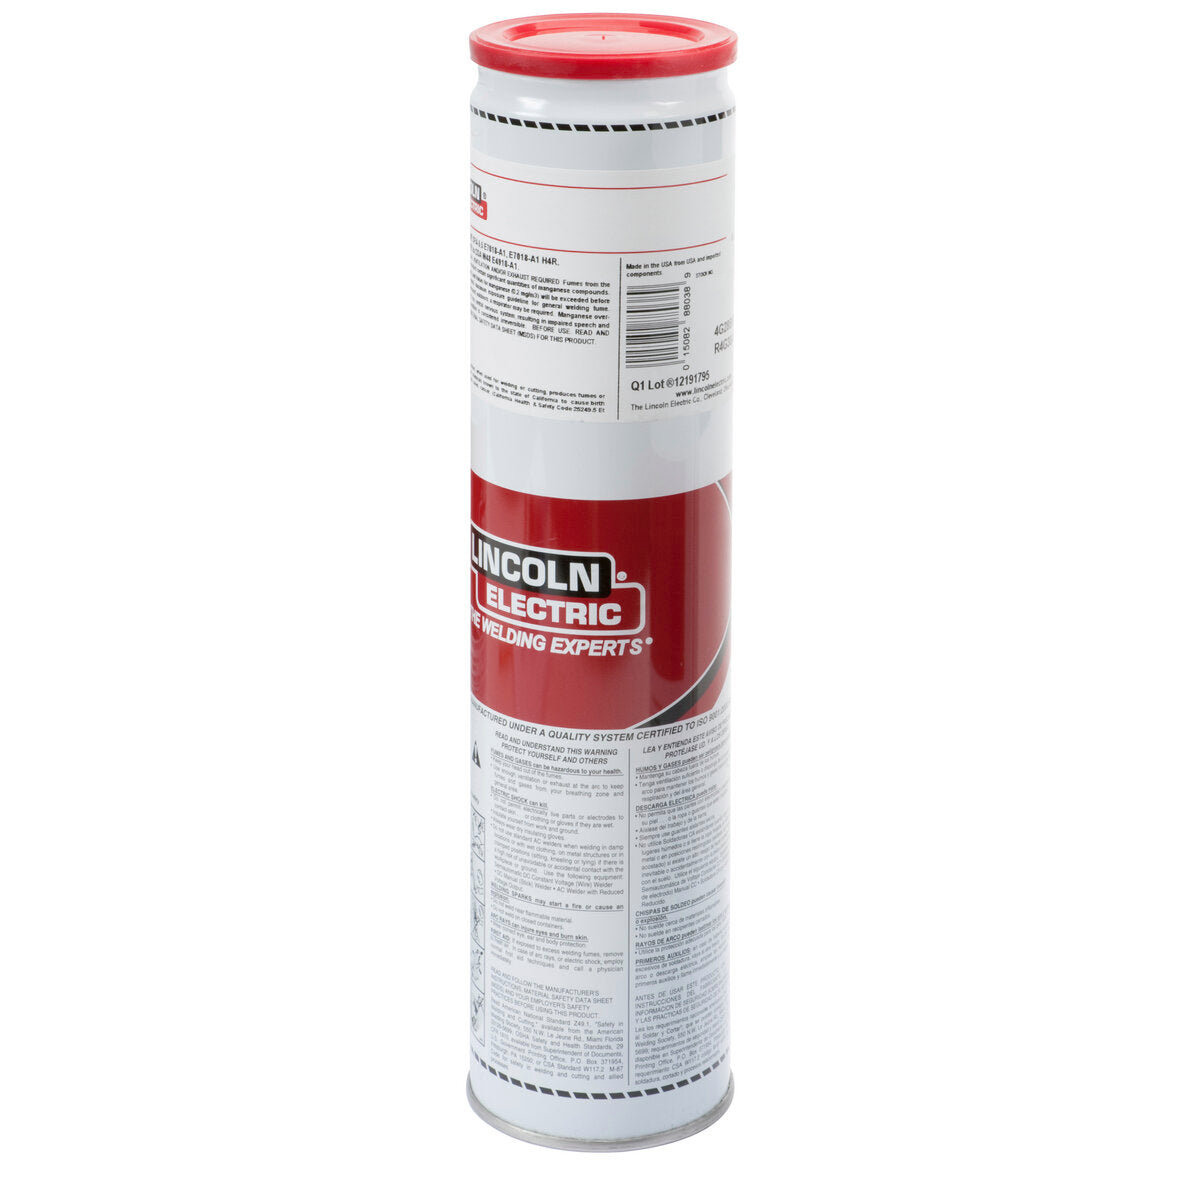 Lincoln Electric - Excalibur® 7018-A1 MR® Stick (SMAW) Electrode, 3/32x12 in, (3) 8 lb Easy Open Can - ED032893